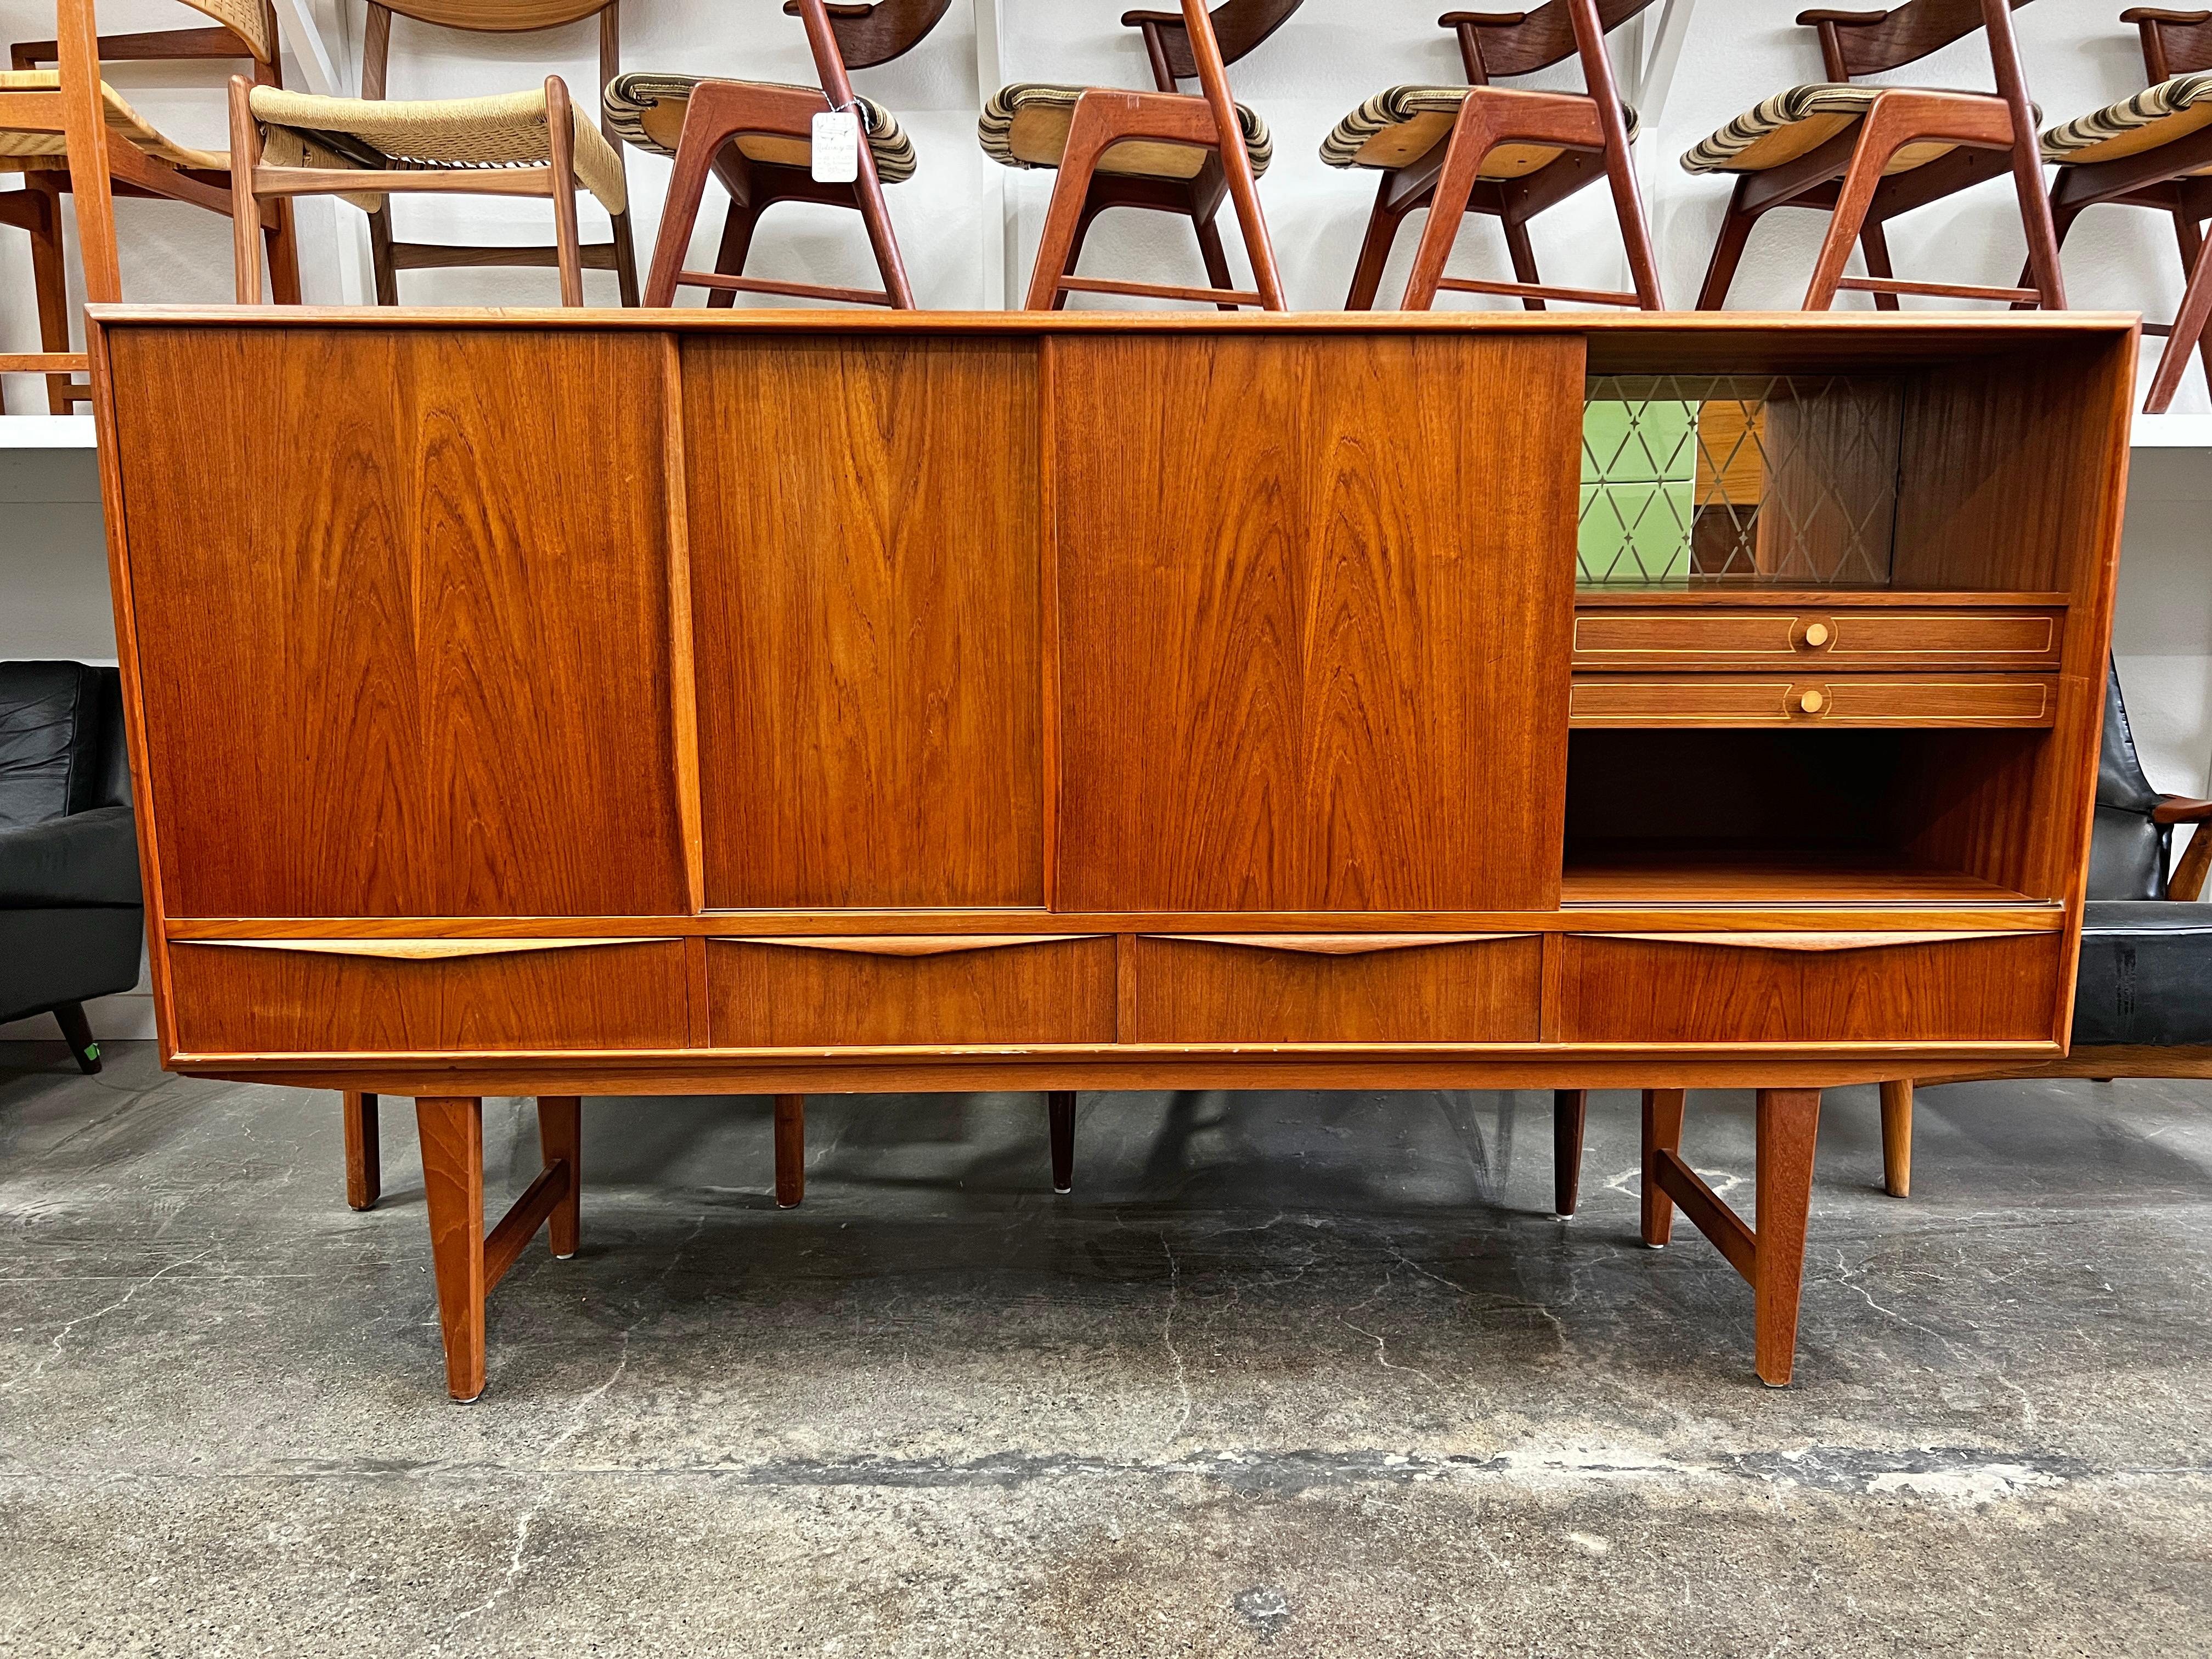 20th Century Tall Teak Danish Modern Credenza by E.W. Bach with Bar For Sale